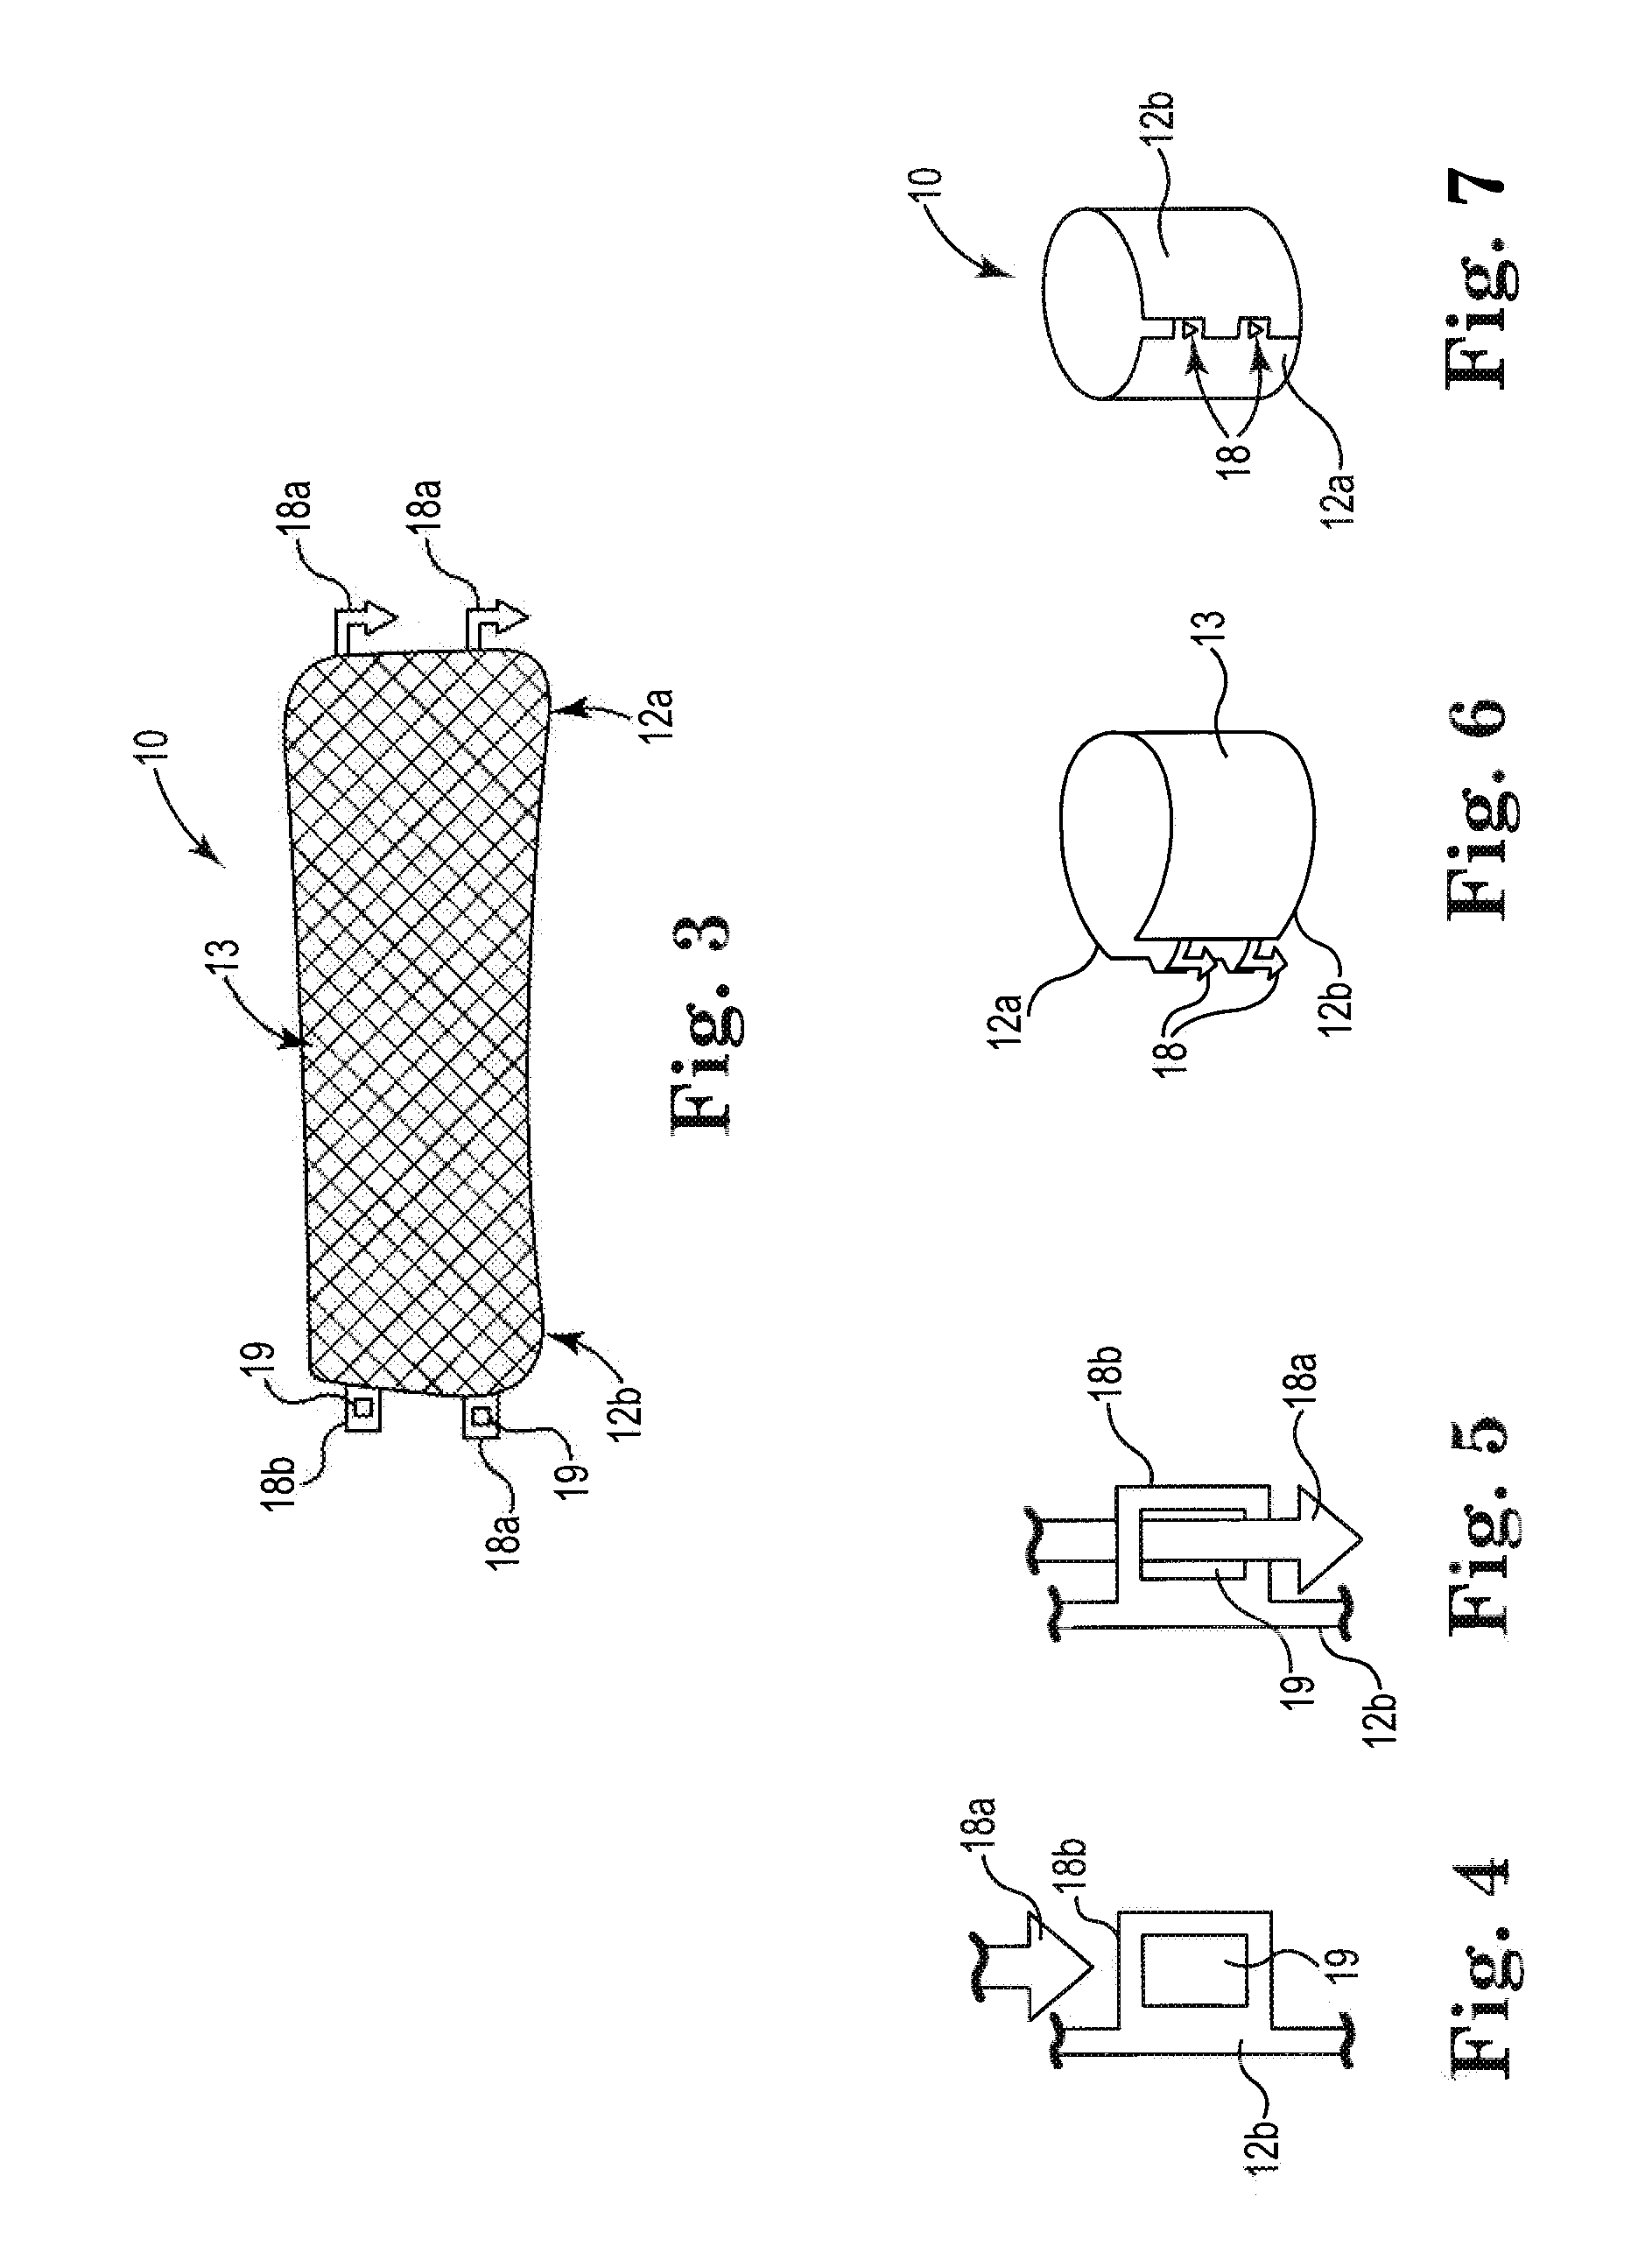 Fecal Incontinence Treatment Device and Method